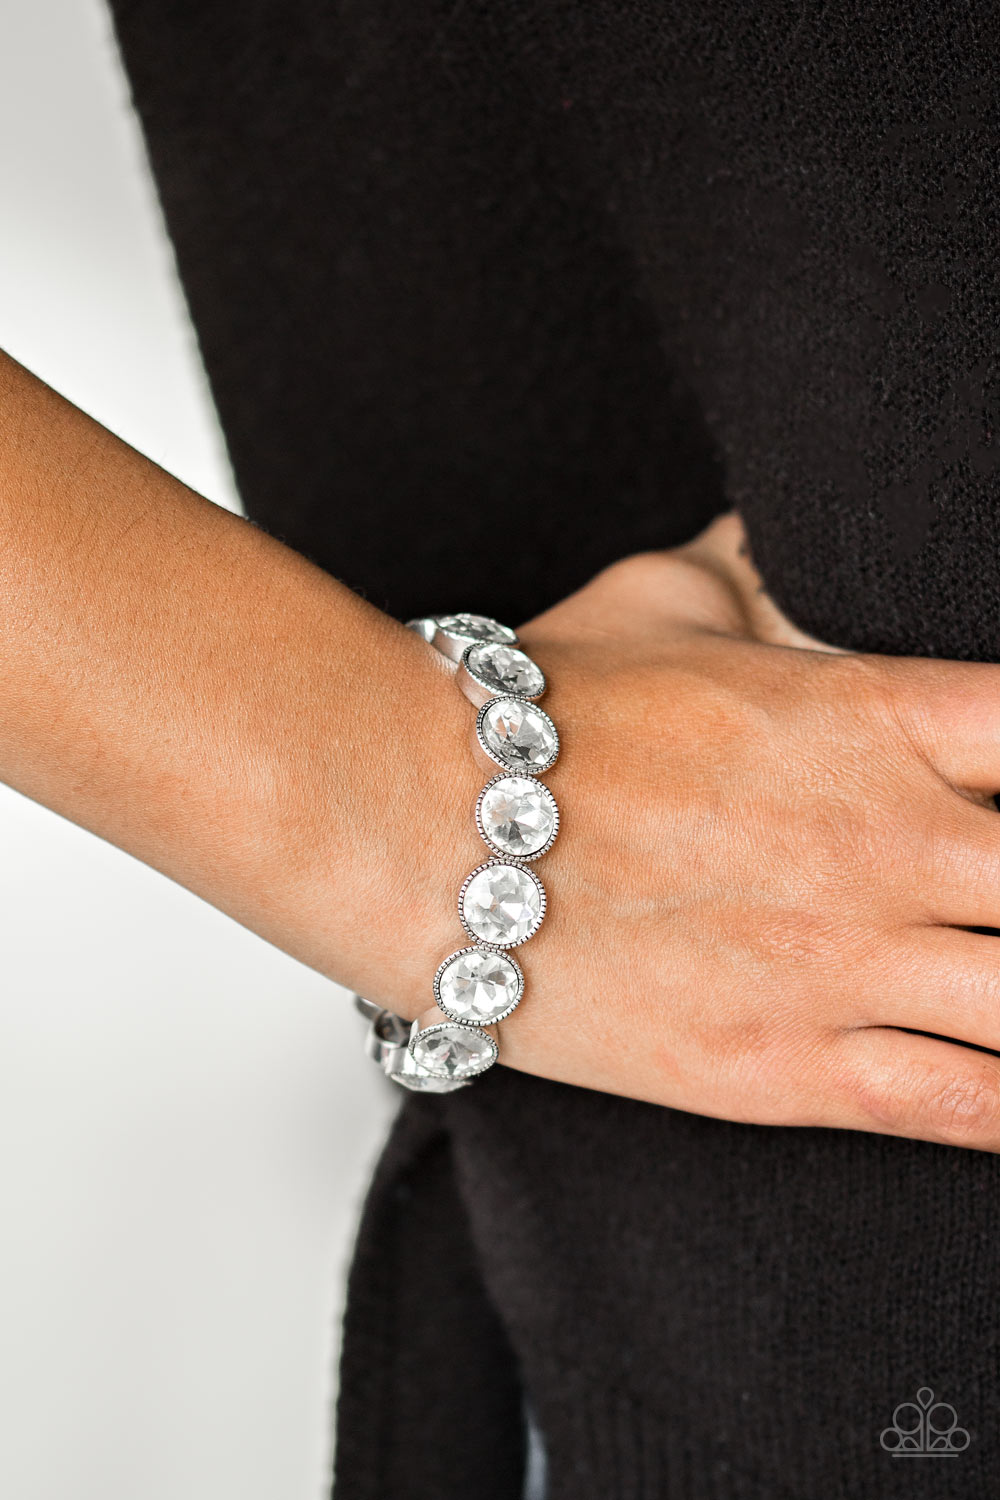 Number One Knockout  White Rhinestone Bracelet - Paparazzi Accessories - Paparazzi Accessories Faceted white gems are pressed into sleek silver frames.  The glittery frames are threaded along elastic stretchy bands, creating a glamorous look around the wrist.  